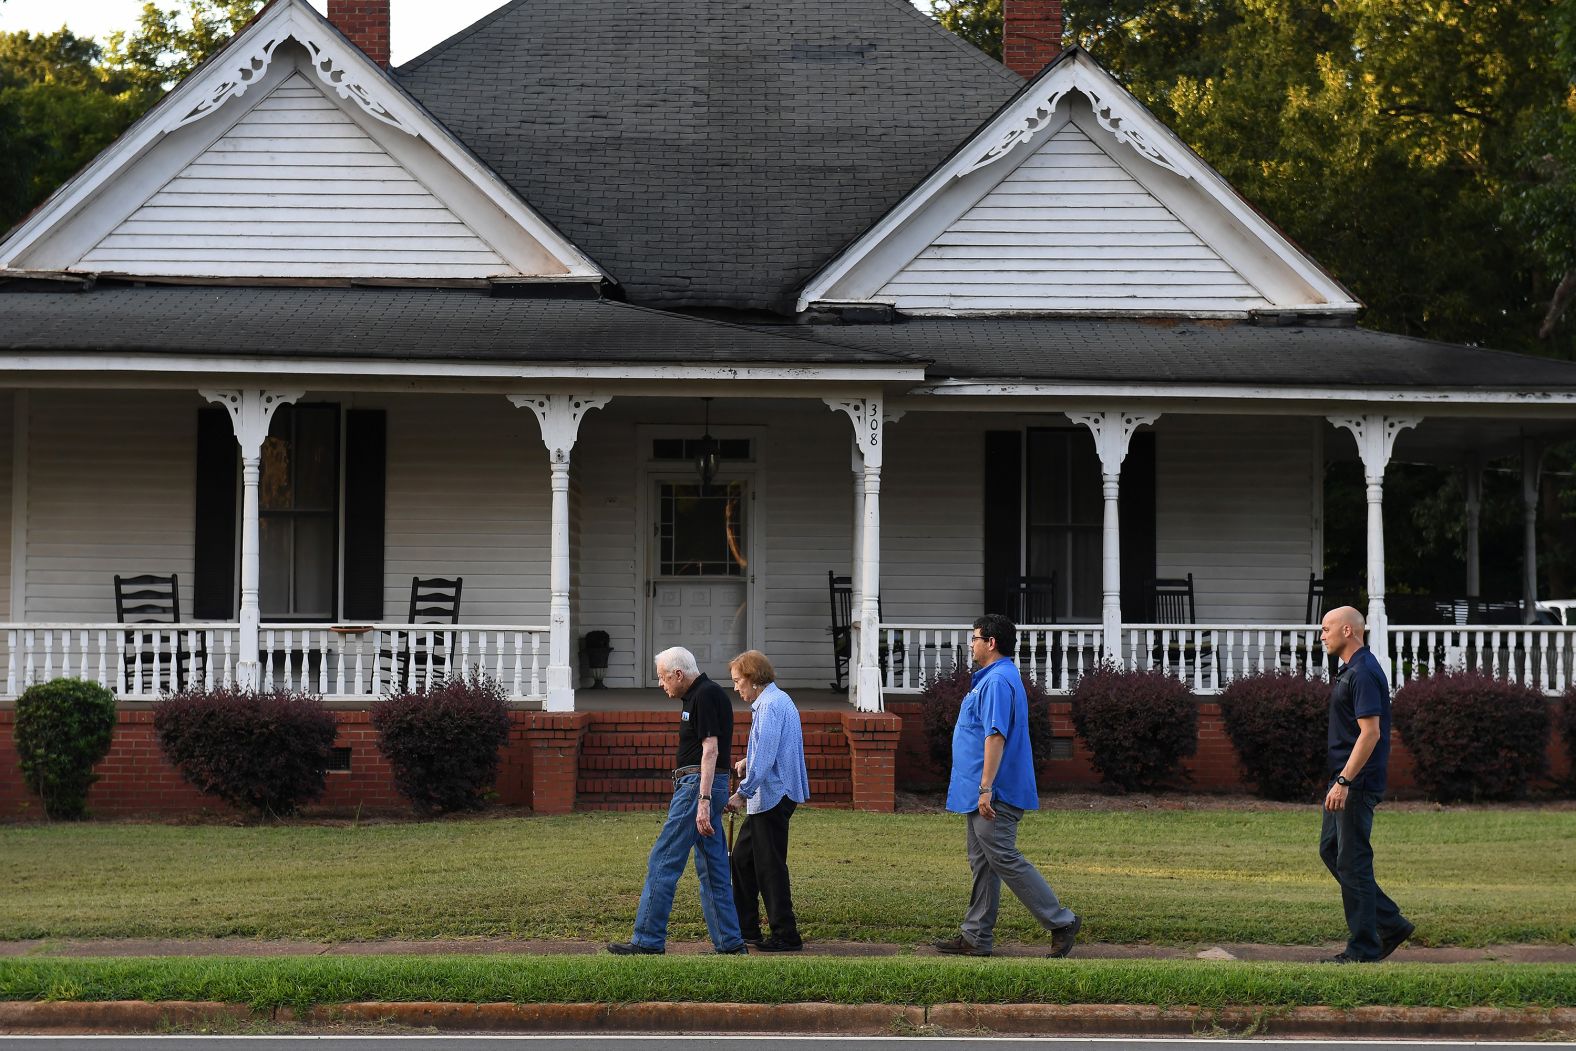 Carter walks with his wife, Rosalynn, and Secret Service members after having dinner at a friend's home in Plains, Georgia, in August 2018.